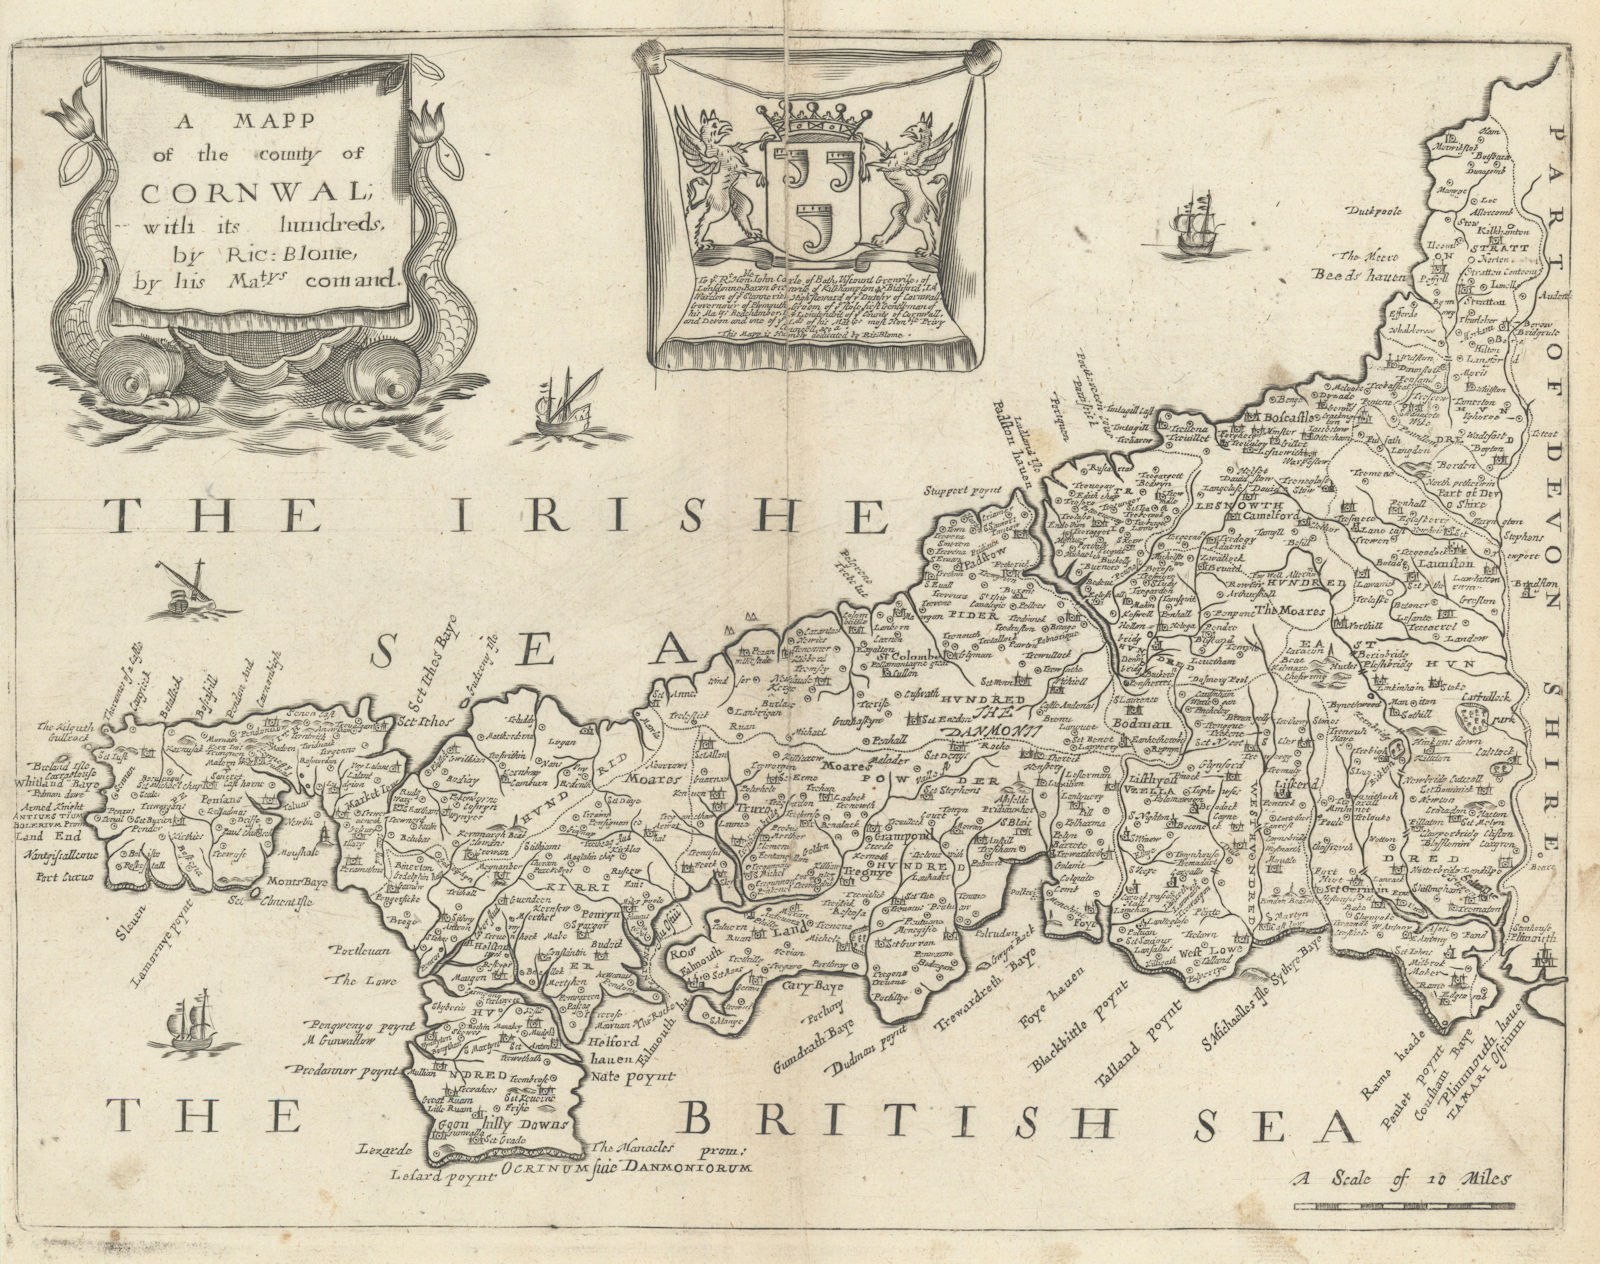 A Mapp of the county of Cornwal; With its Hundreds by Richard Blome 1673